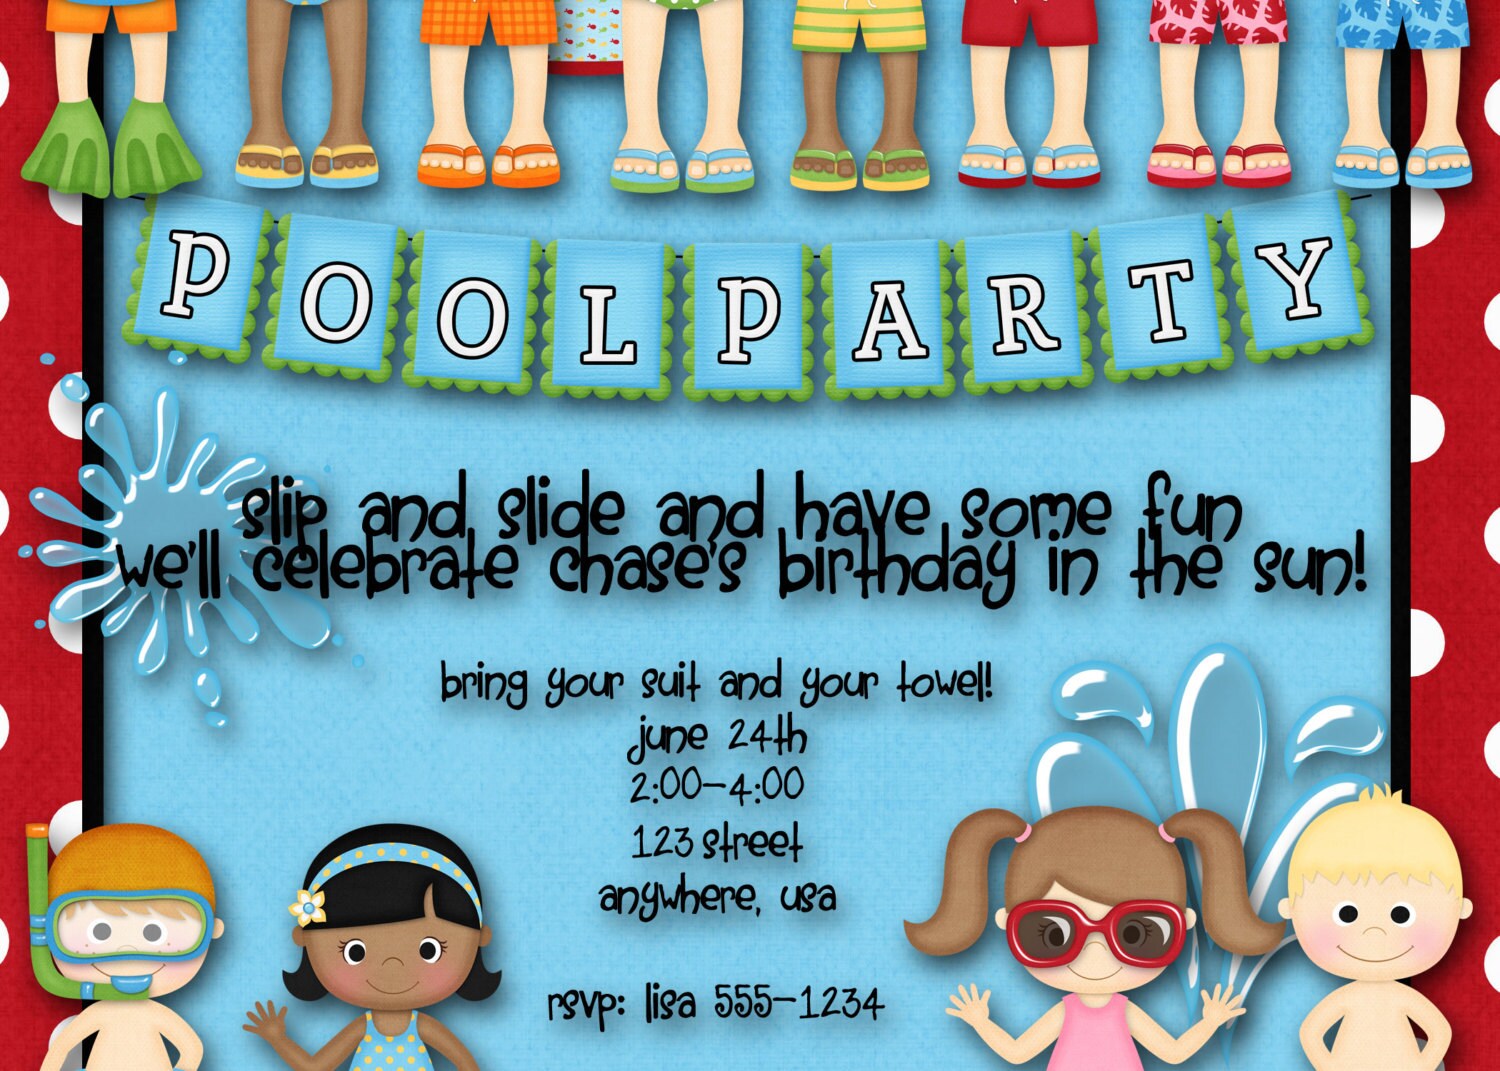 Pool Party Birthday Party Invitations Swimming outdoors